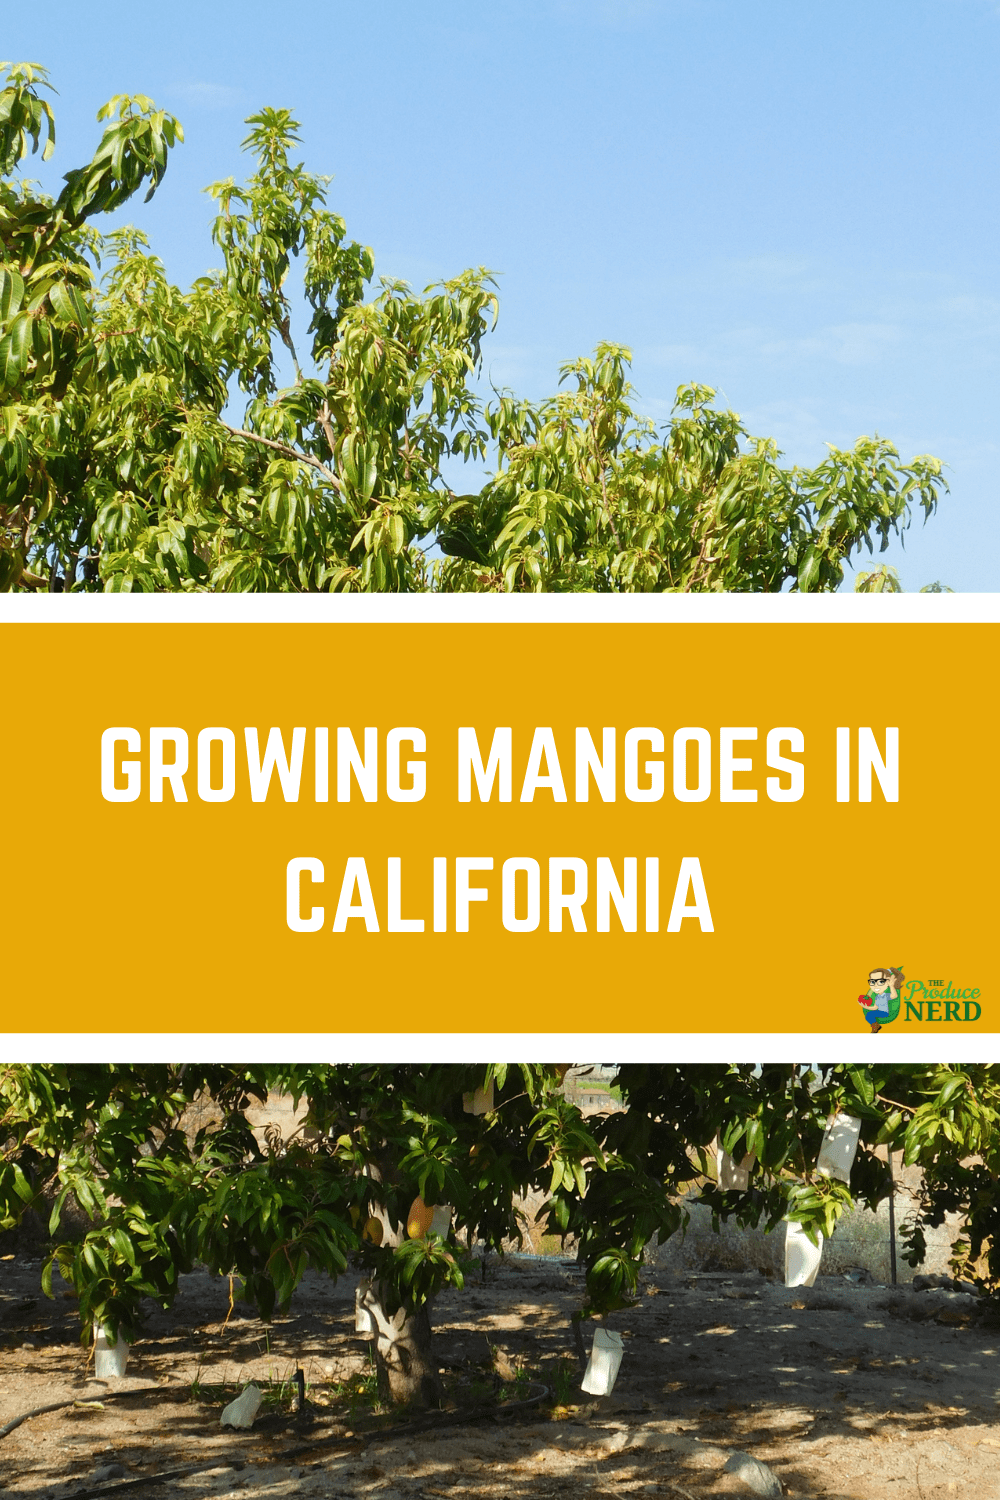 You are currently viewing Mango Farming in Southern California at Wong Farms